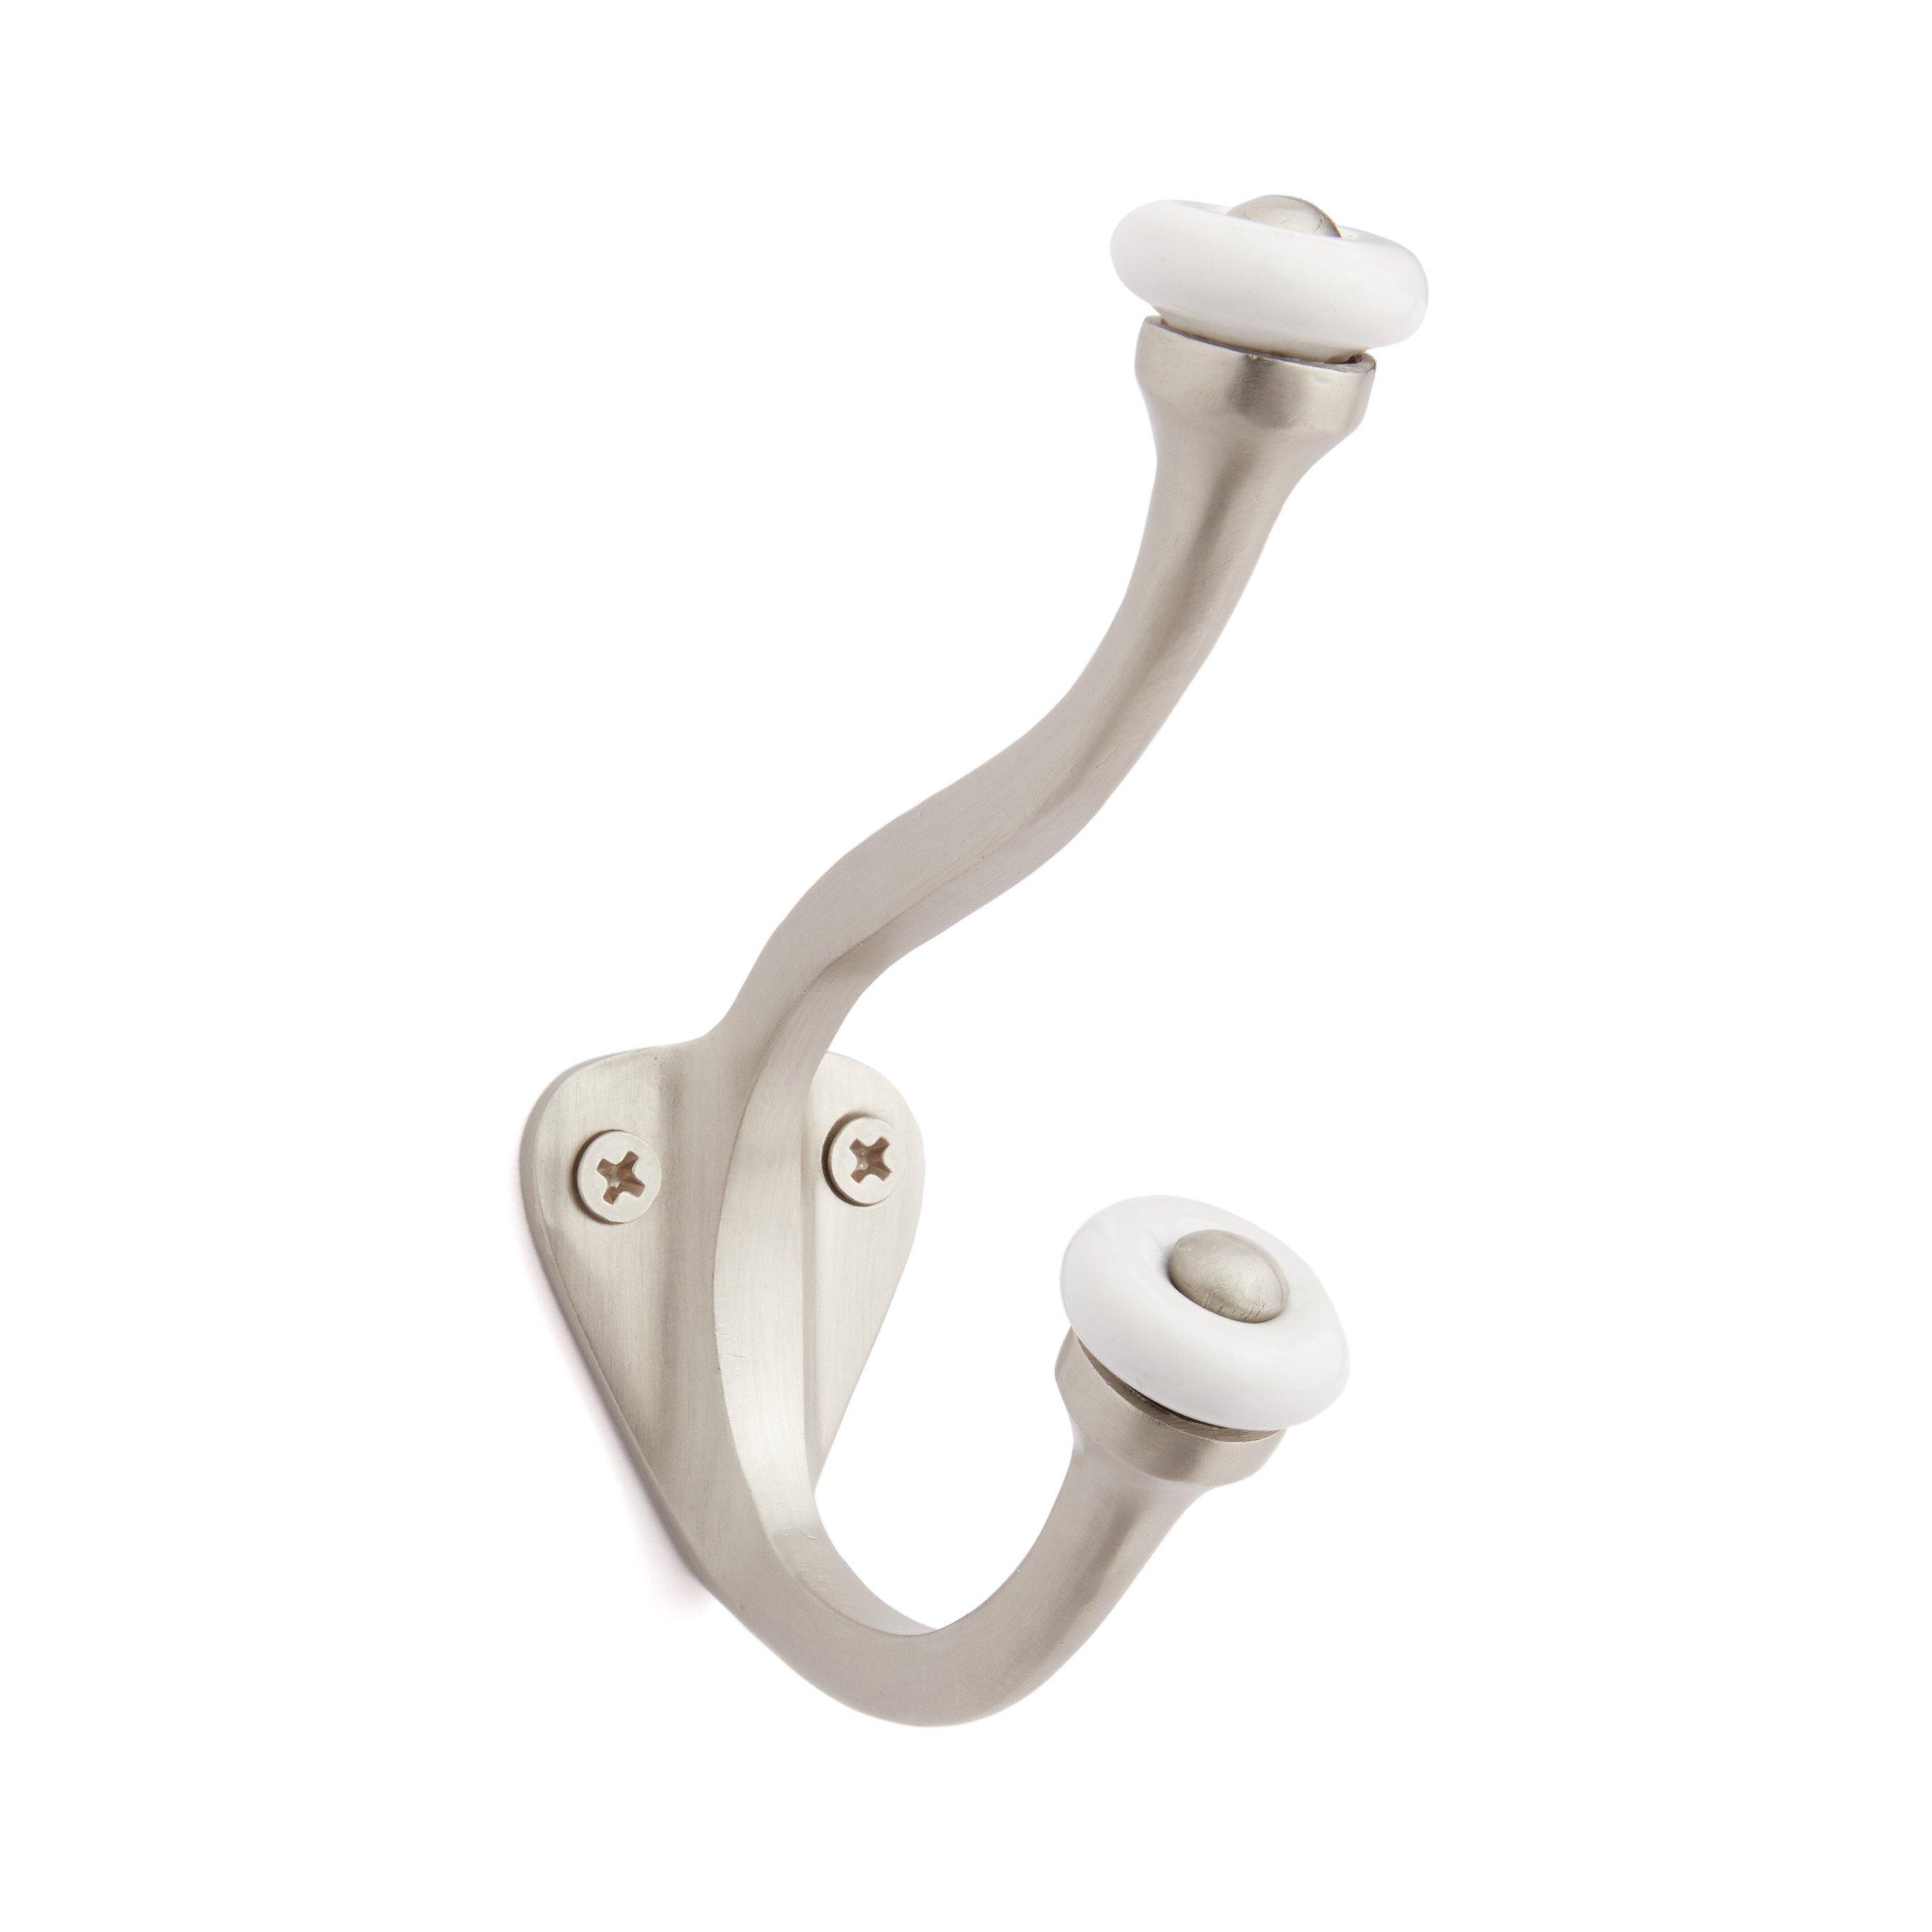 Signature Hardware 910679 Linwood Double Brass Hook - Nickel, Silver